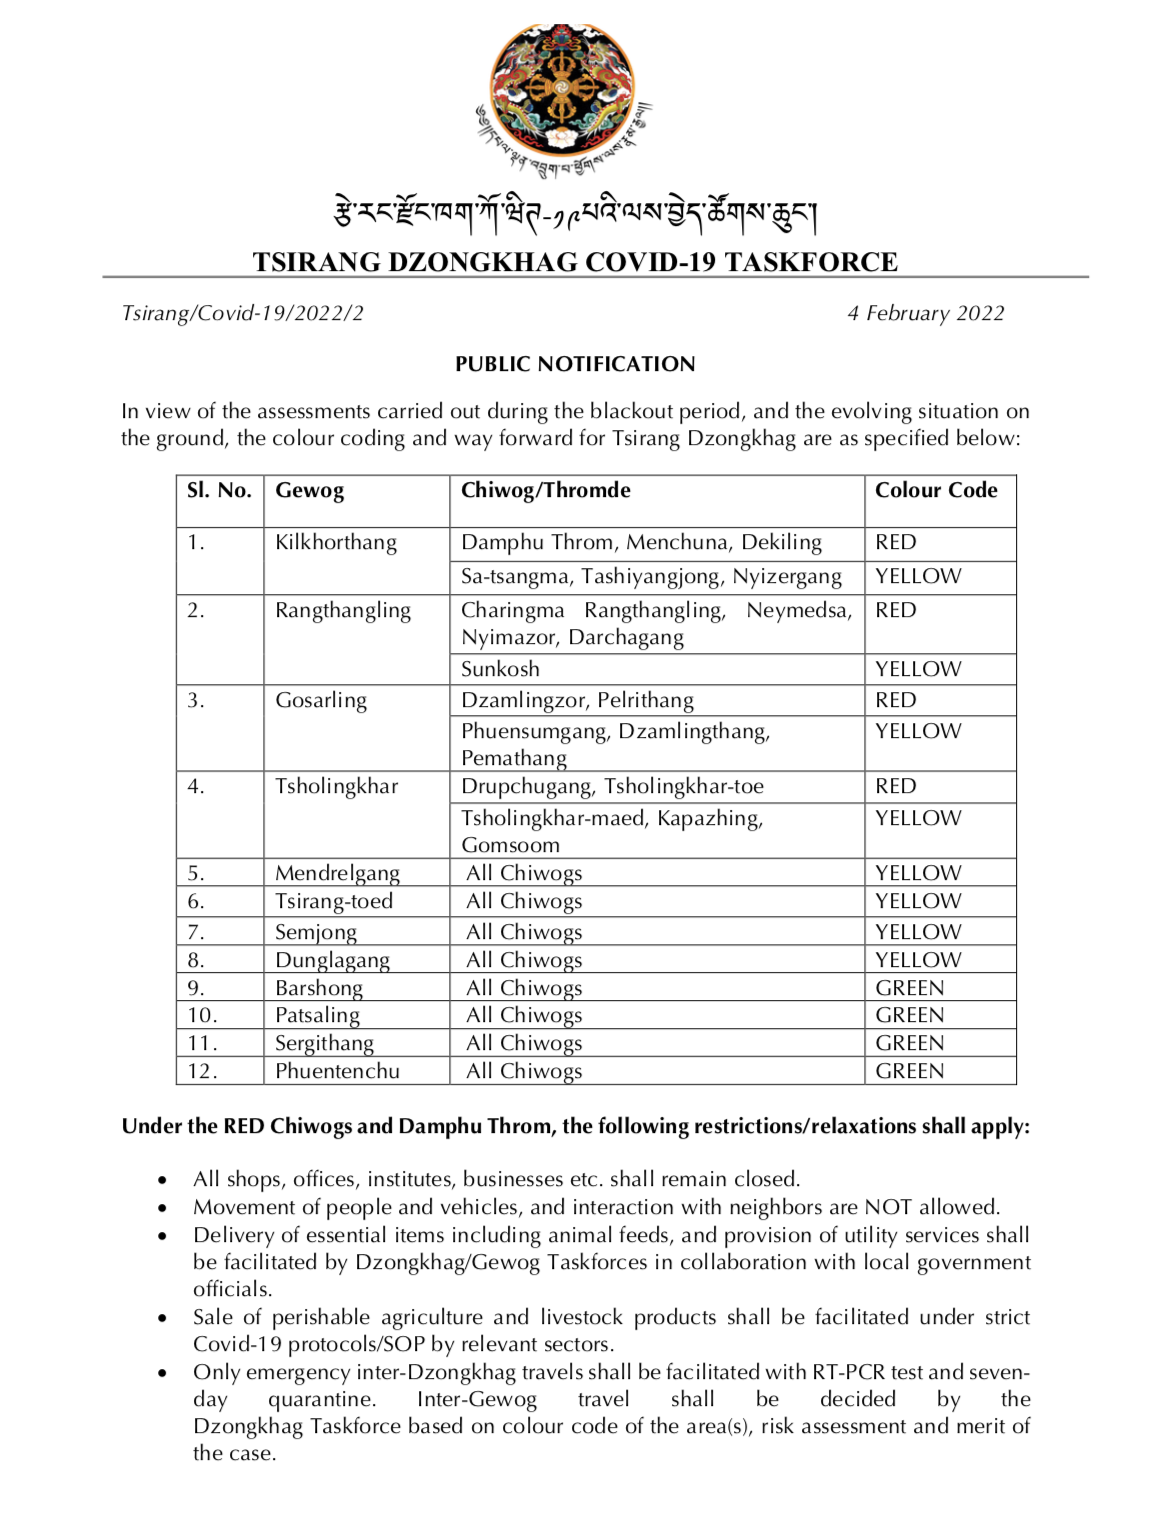 Notification on  colour-coding and phase-wise relaxation of lockdown in Tsirang Dzongkhag.